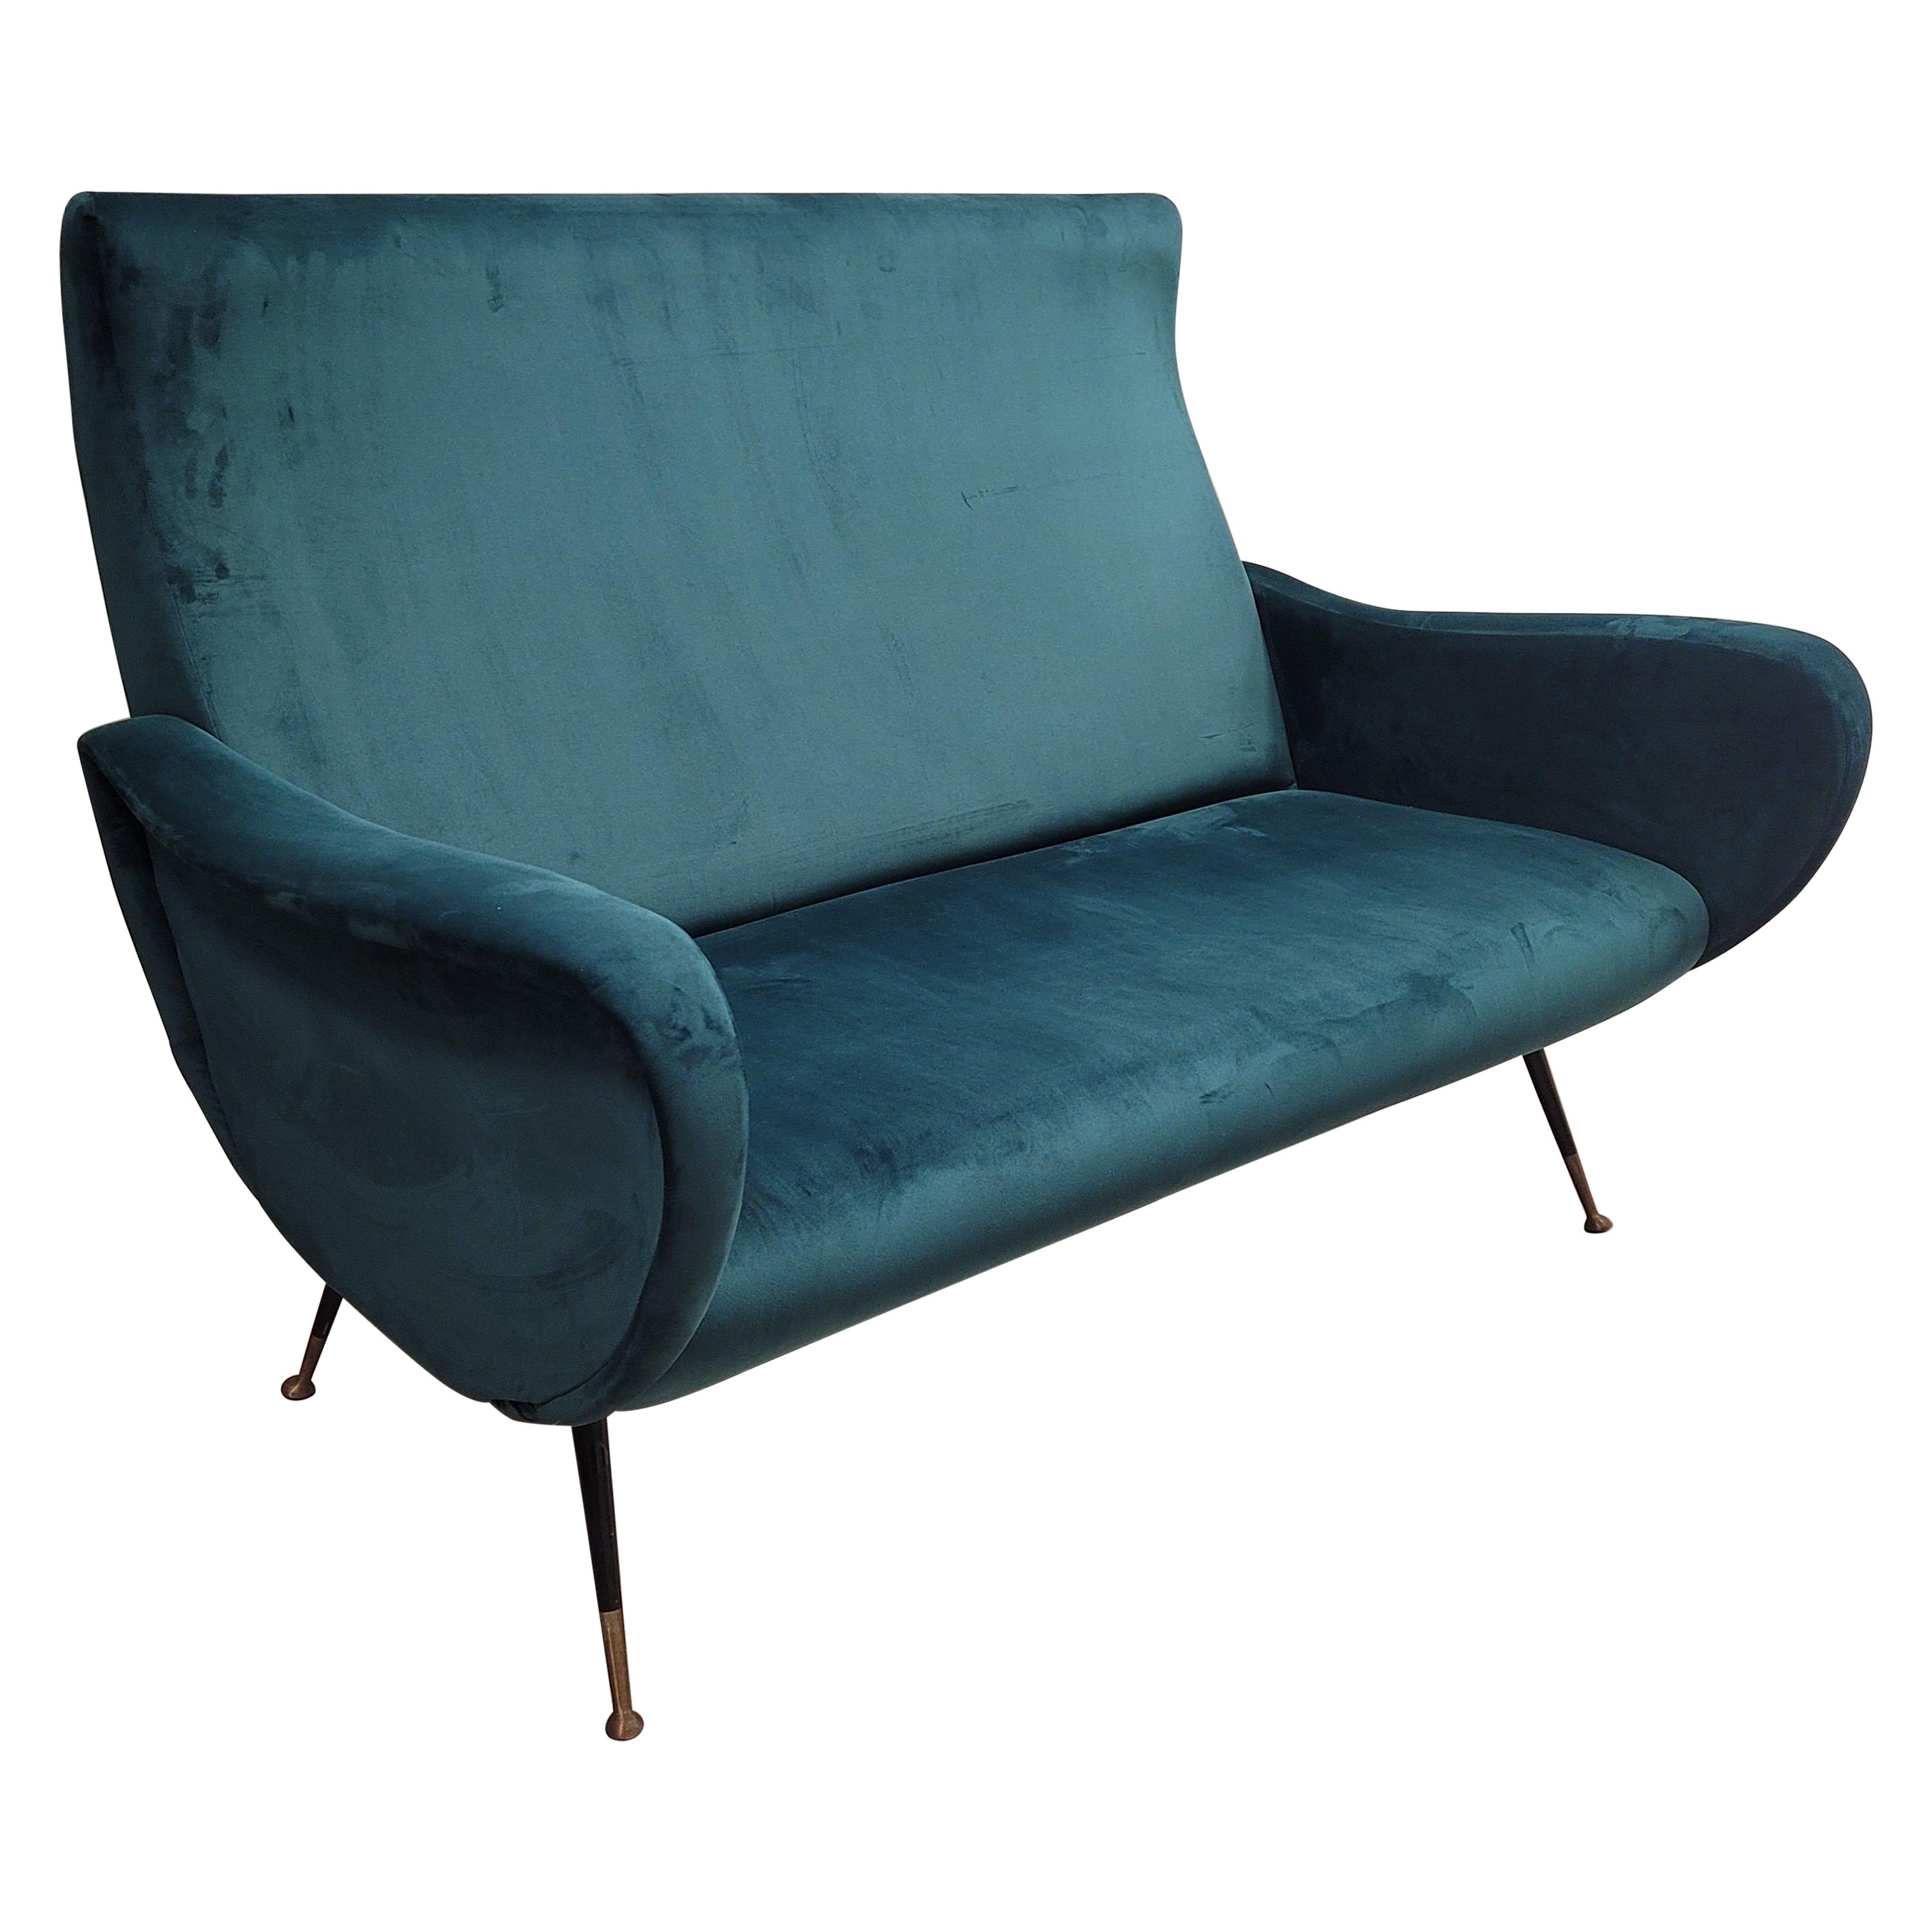 Marco Zanusso Italian Green Sofa for two For Sale